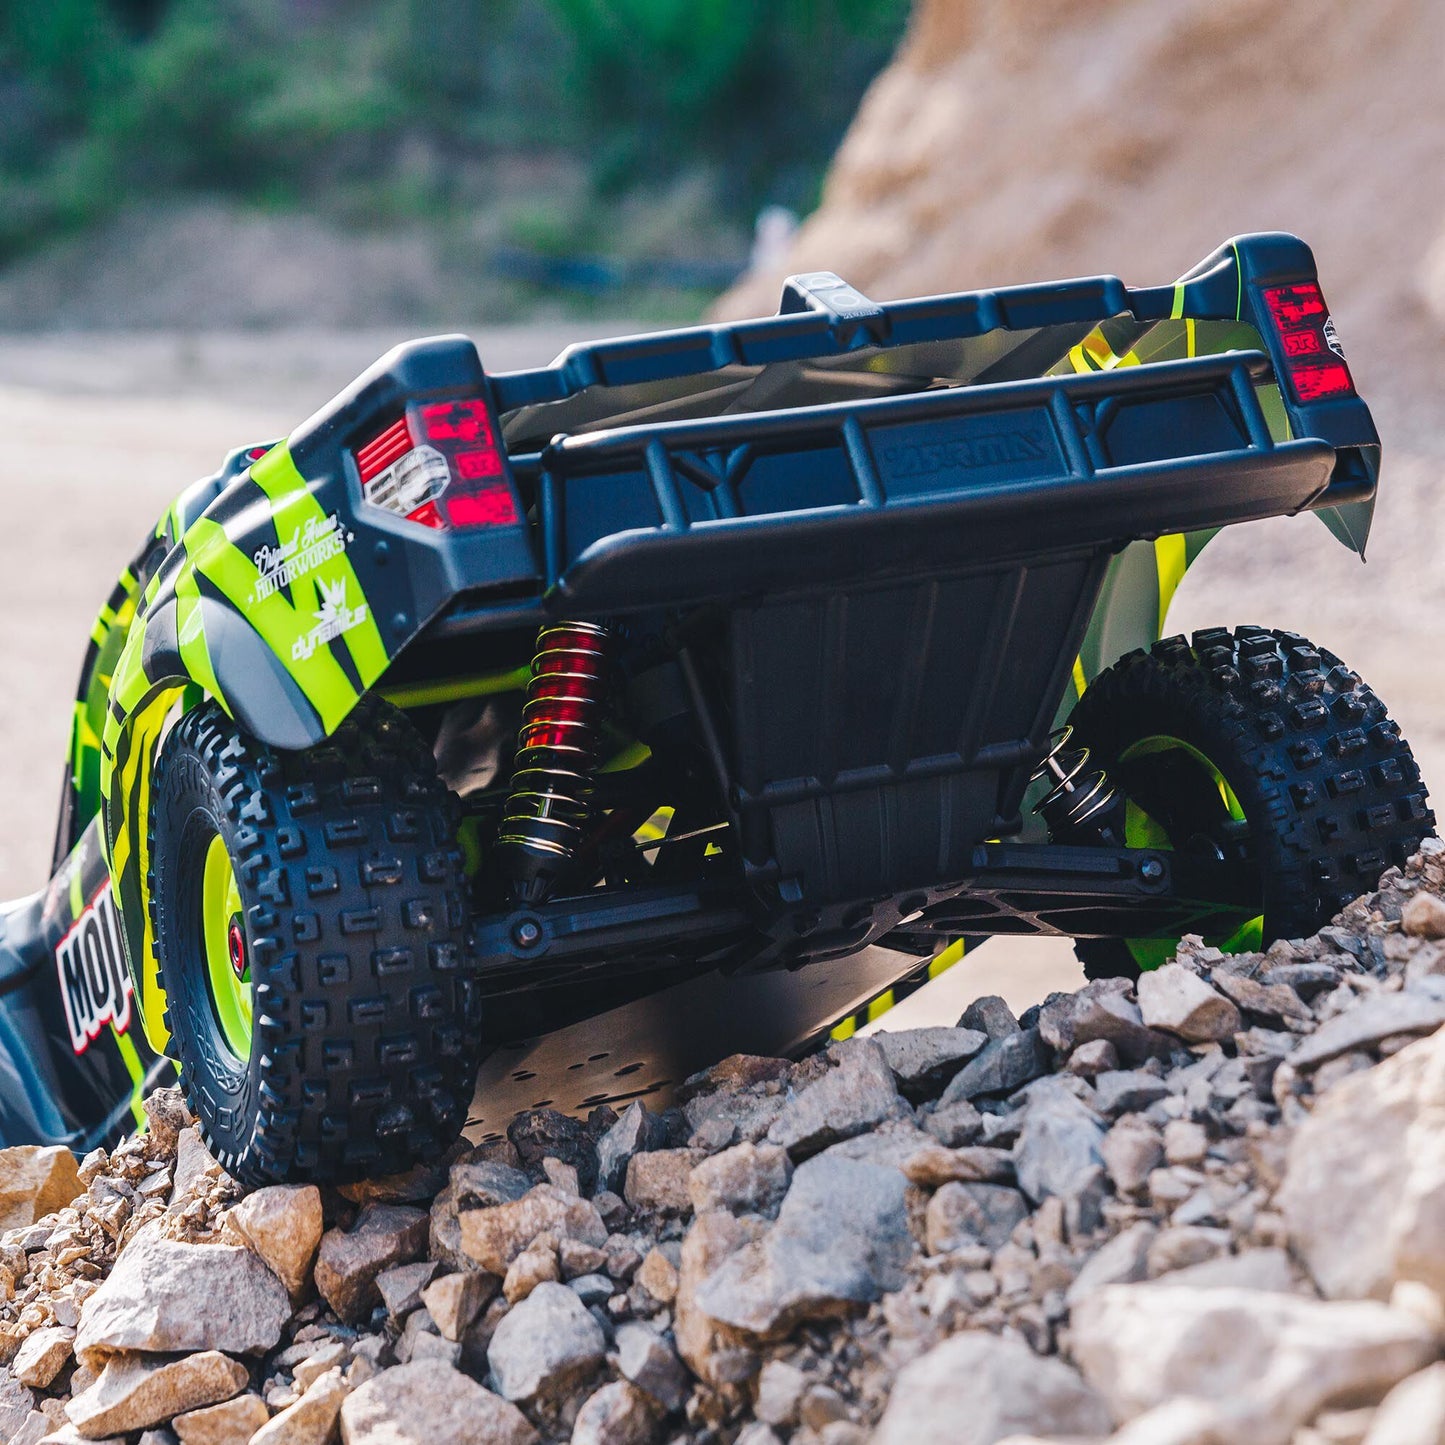 1/7 MOJAVE 6S V2 4WD BLX Desert Truck with Spektrum Firma RTR, Green/Black - Dirt Cheap RC SAVING YOU MONEY, ONE PART AT A TIME